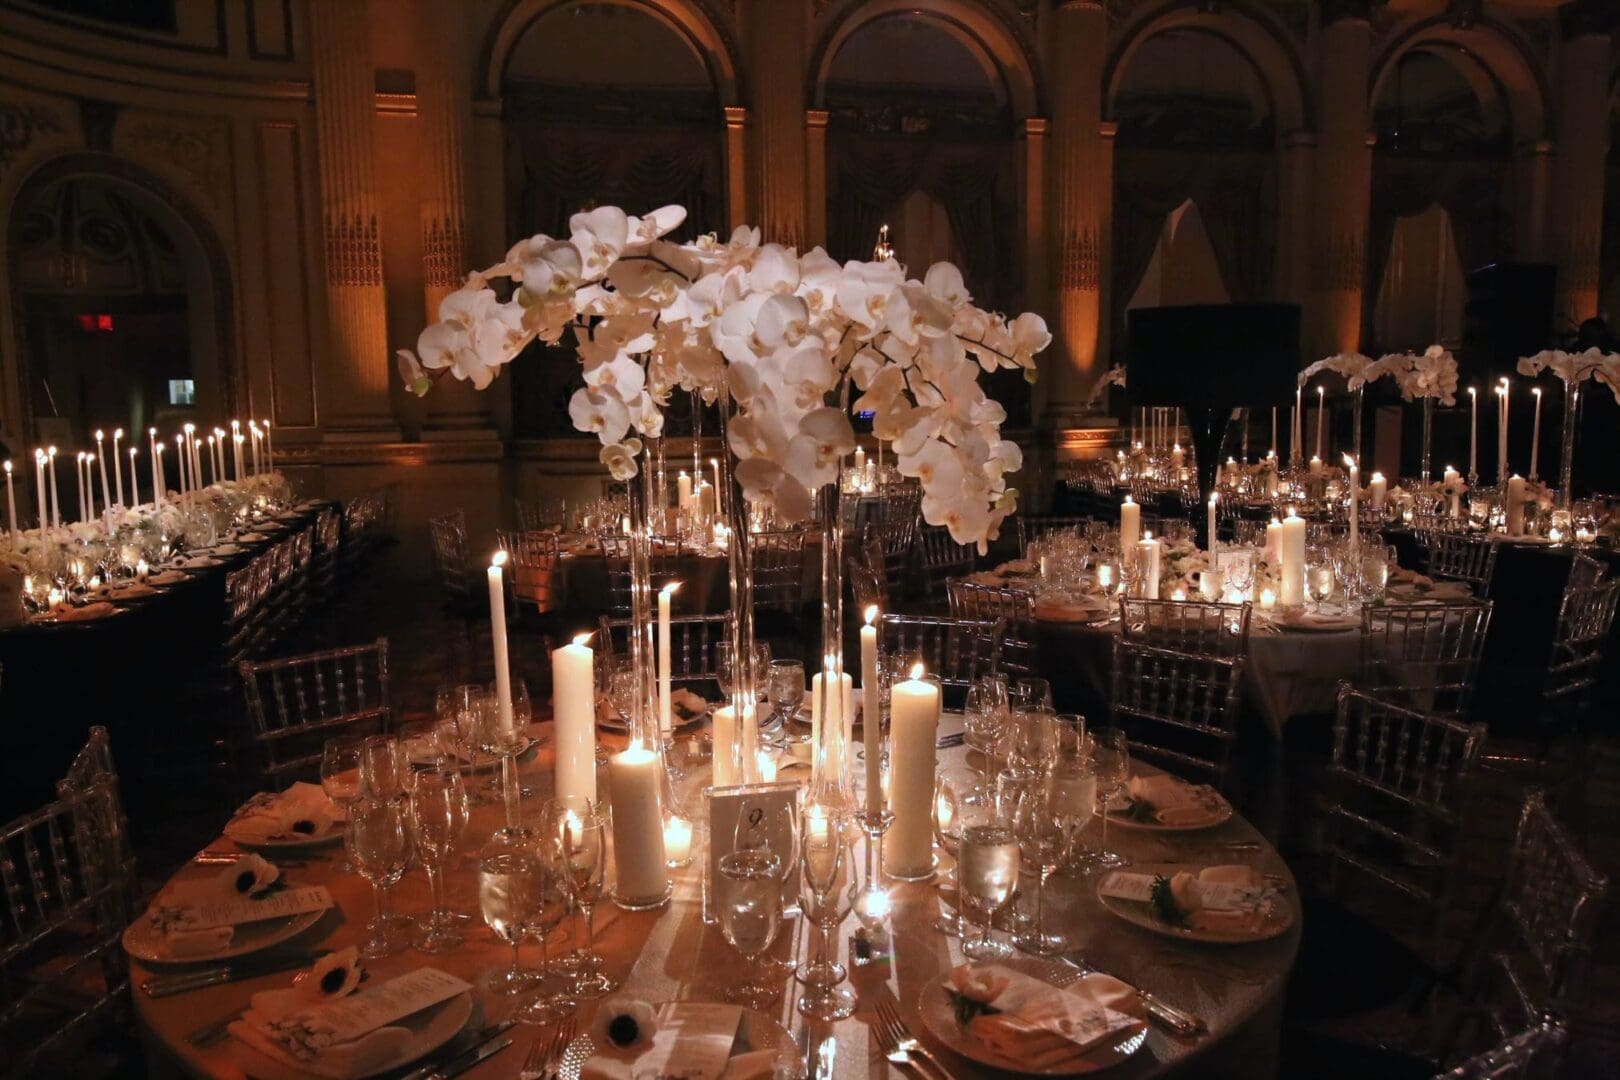 A stunning wedding table scape adorned with candles and orchids.